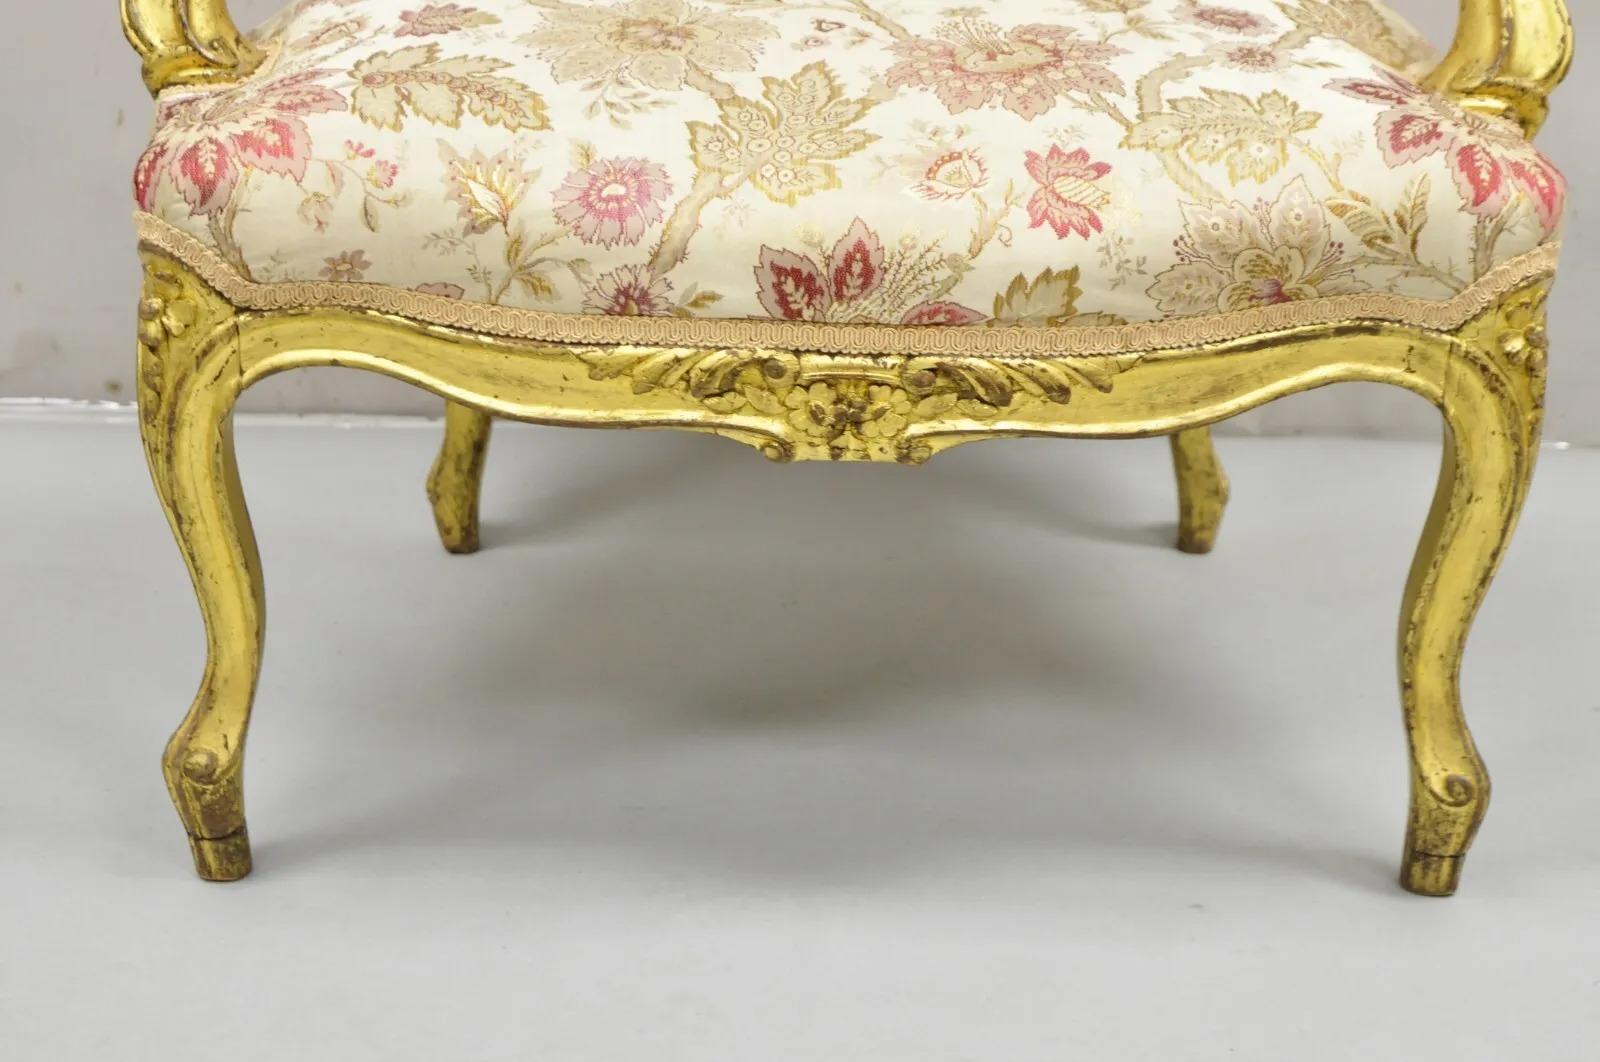 Antique French Louis XV Style Gold Giltwood Floral Carved Upholstered Arm Chair For Sale 1